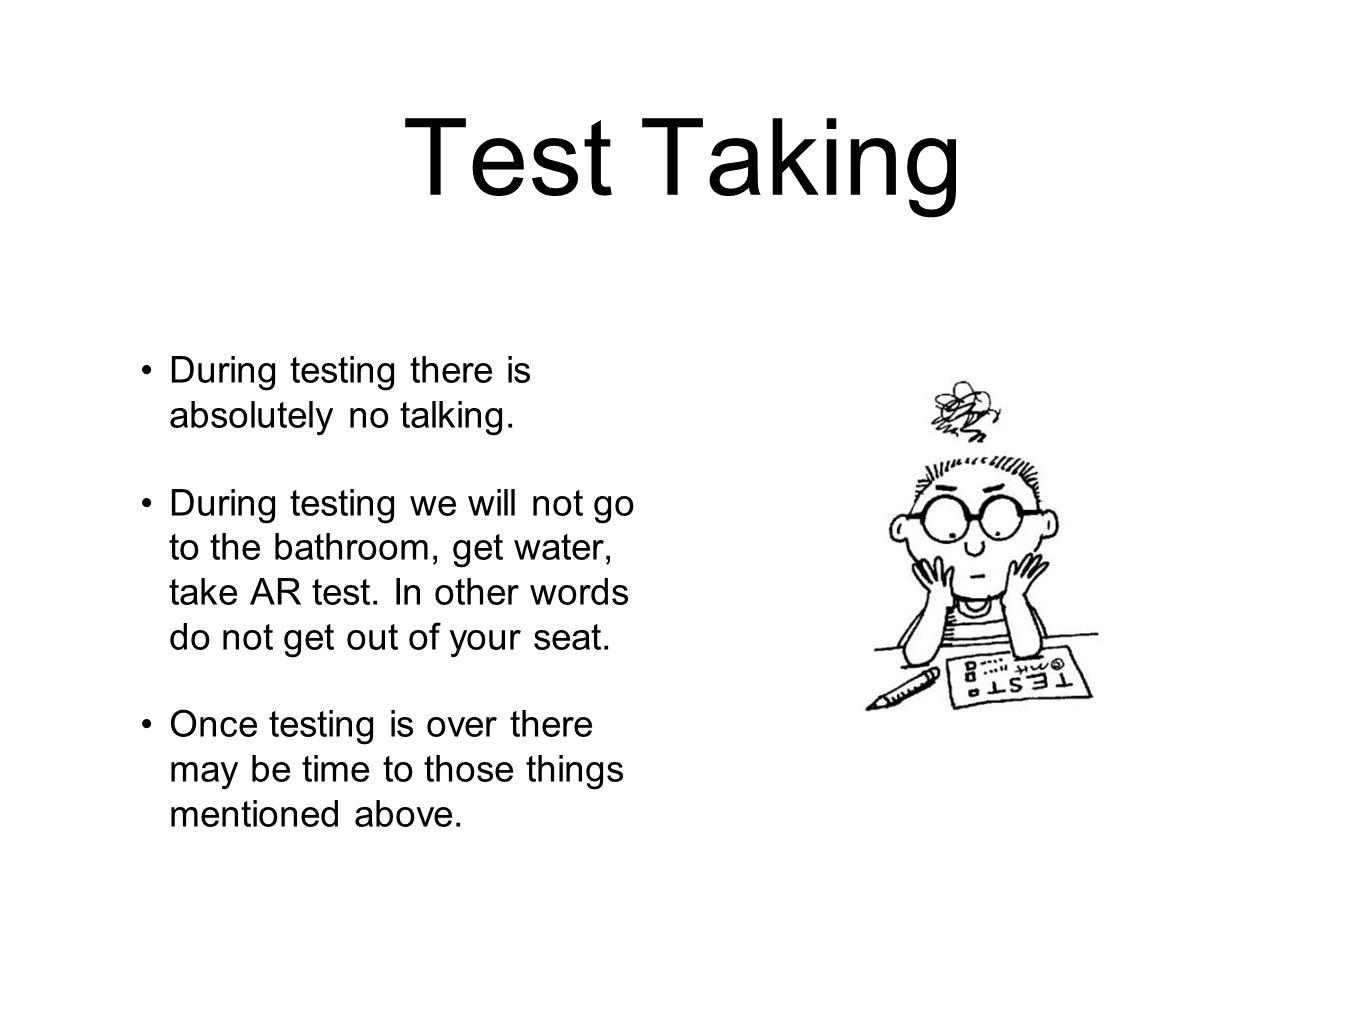 Test Taking During testing there is absolutely no talking.